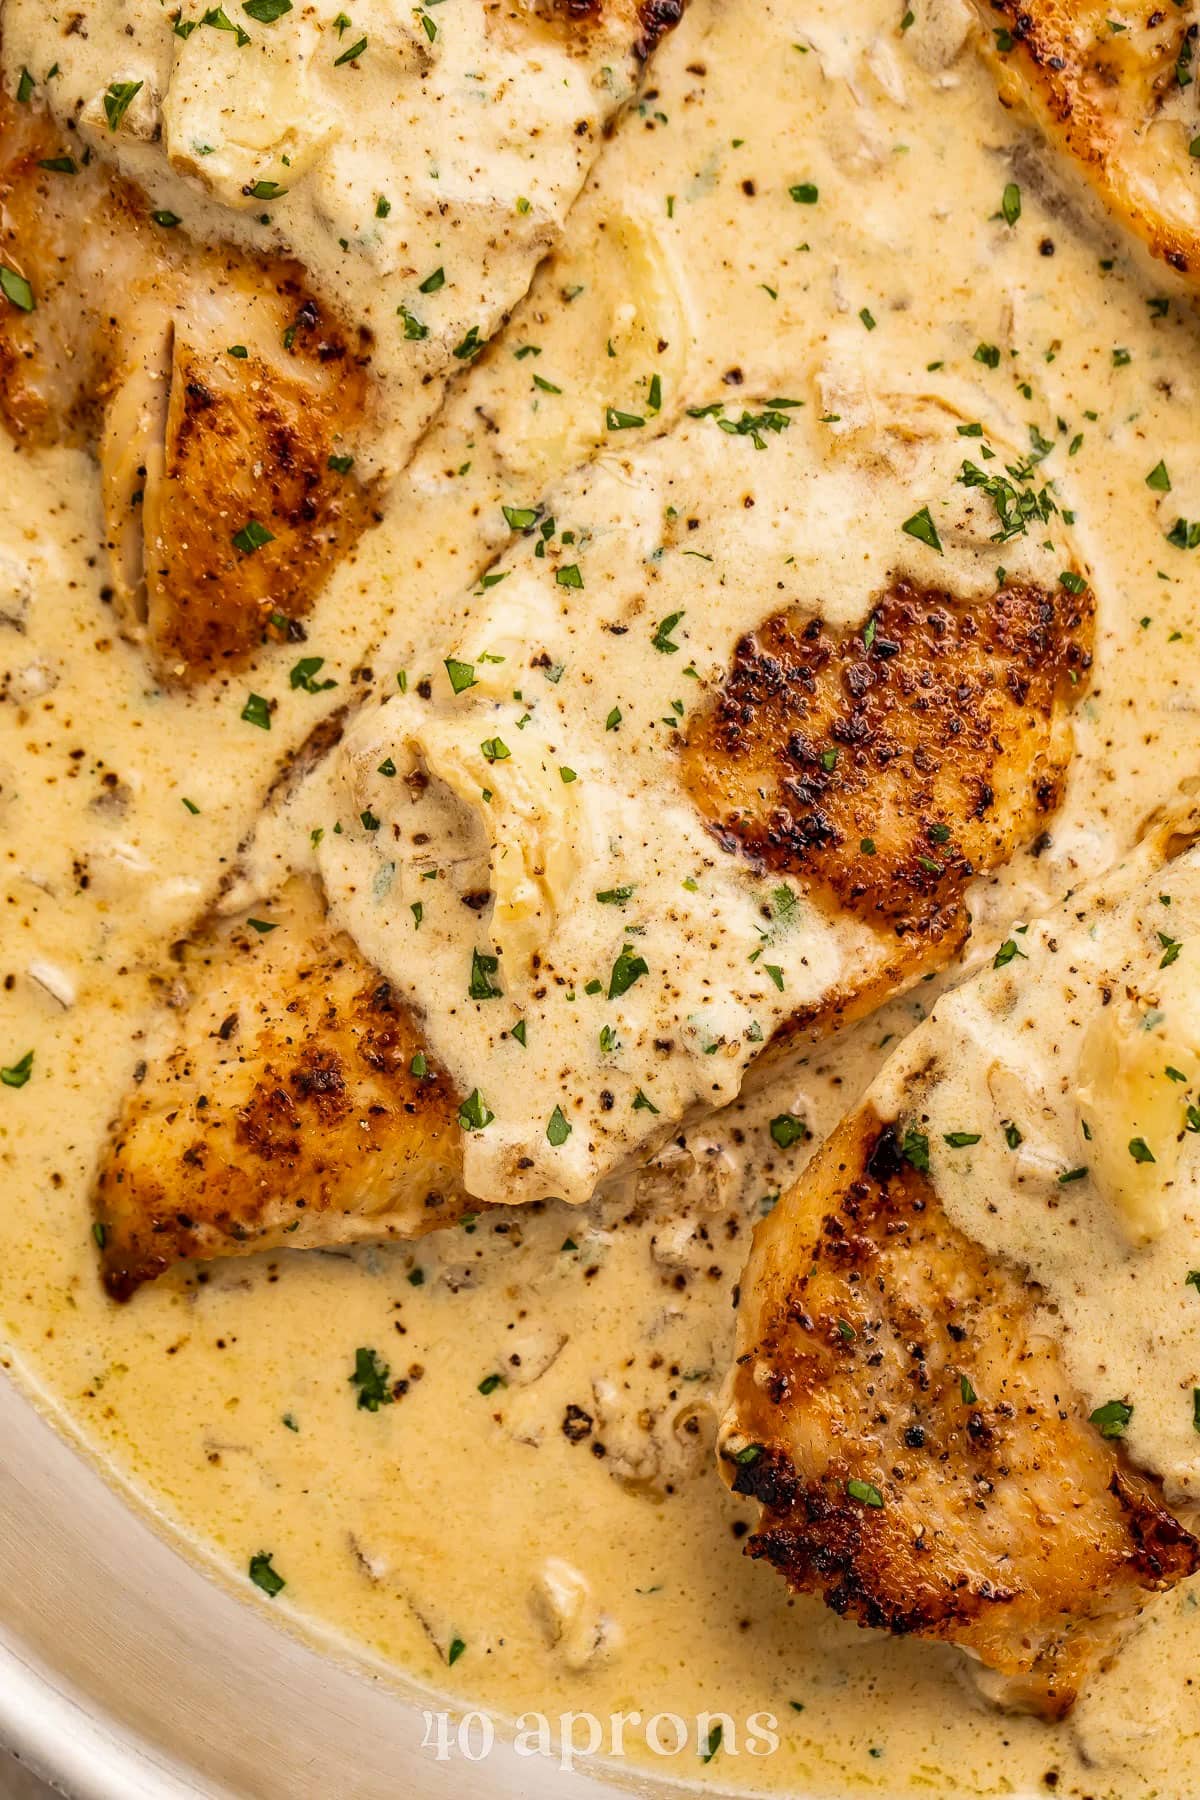 Close-up of a chicken breast swaddled in a creamy garlic sauce, resting in a large silver skillet.